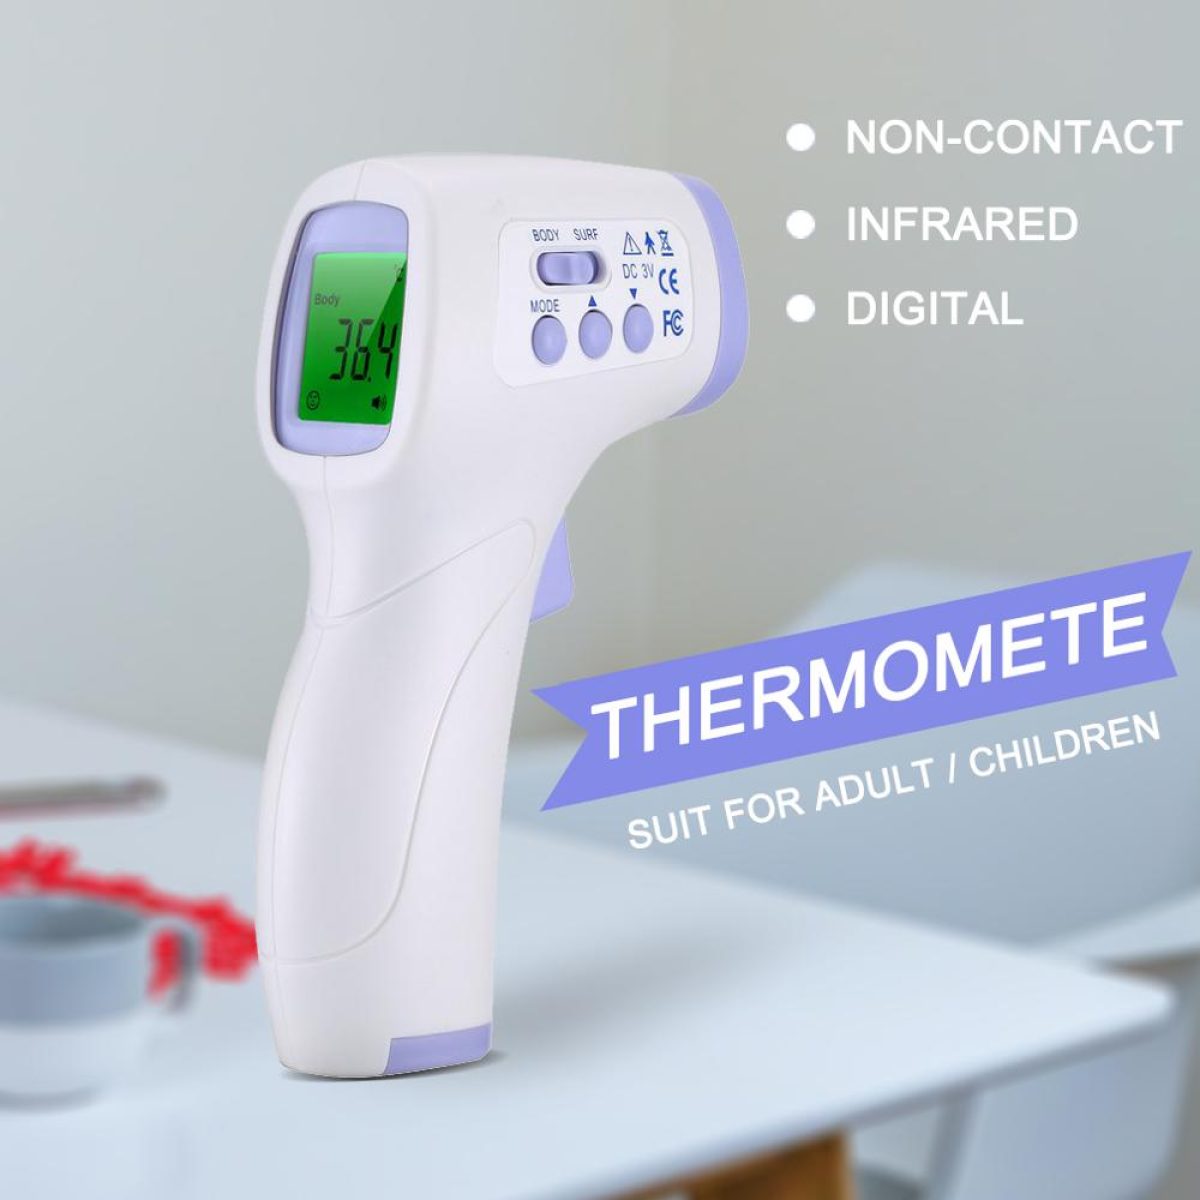 https://kidlovestoys.com/wp-content/uploads/2020/06/Baby-Adult-Digital-Infrared-Thermometer-Forehead-Body-Thermometer-Gun-Non-contact-Temperature-Measurement-Device-Tool-dropship-1200x1200.jpg